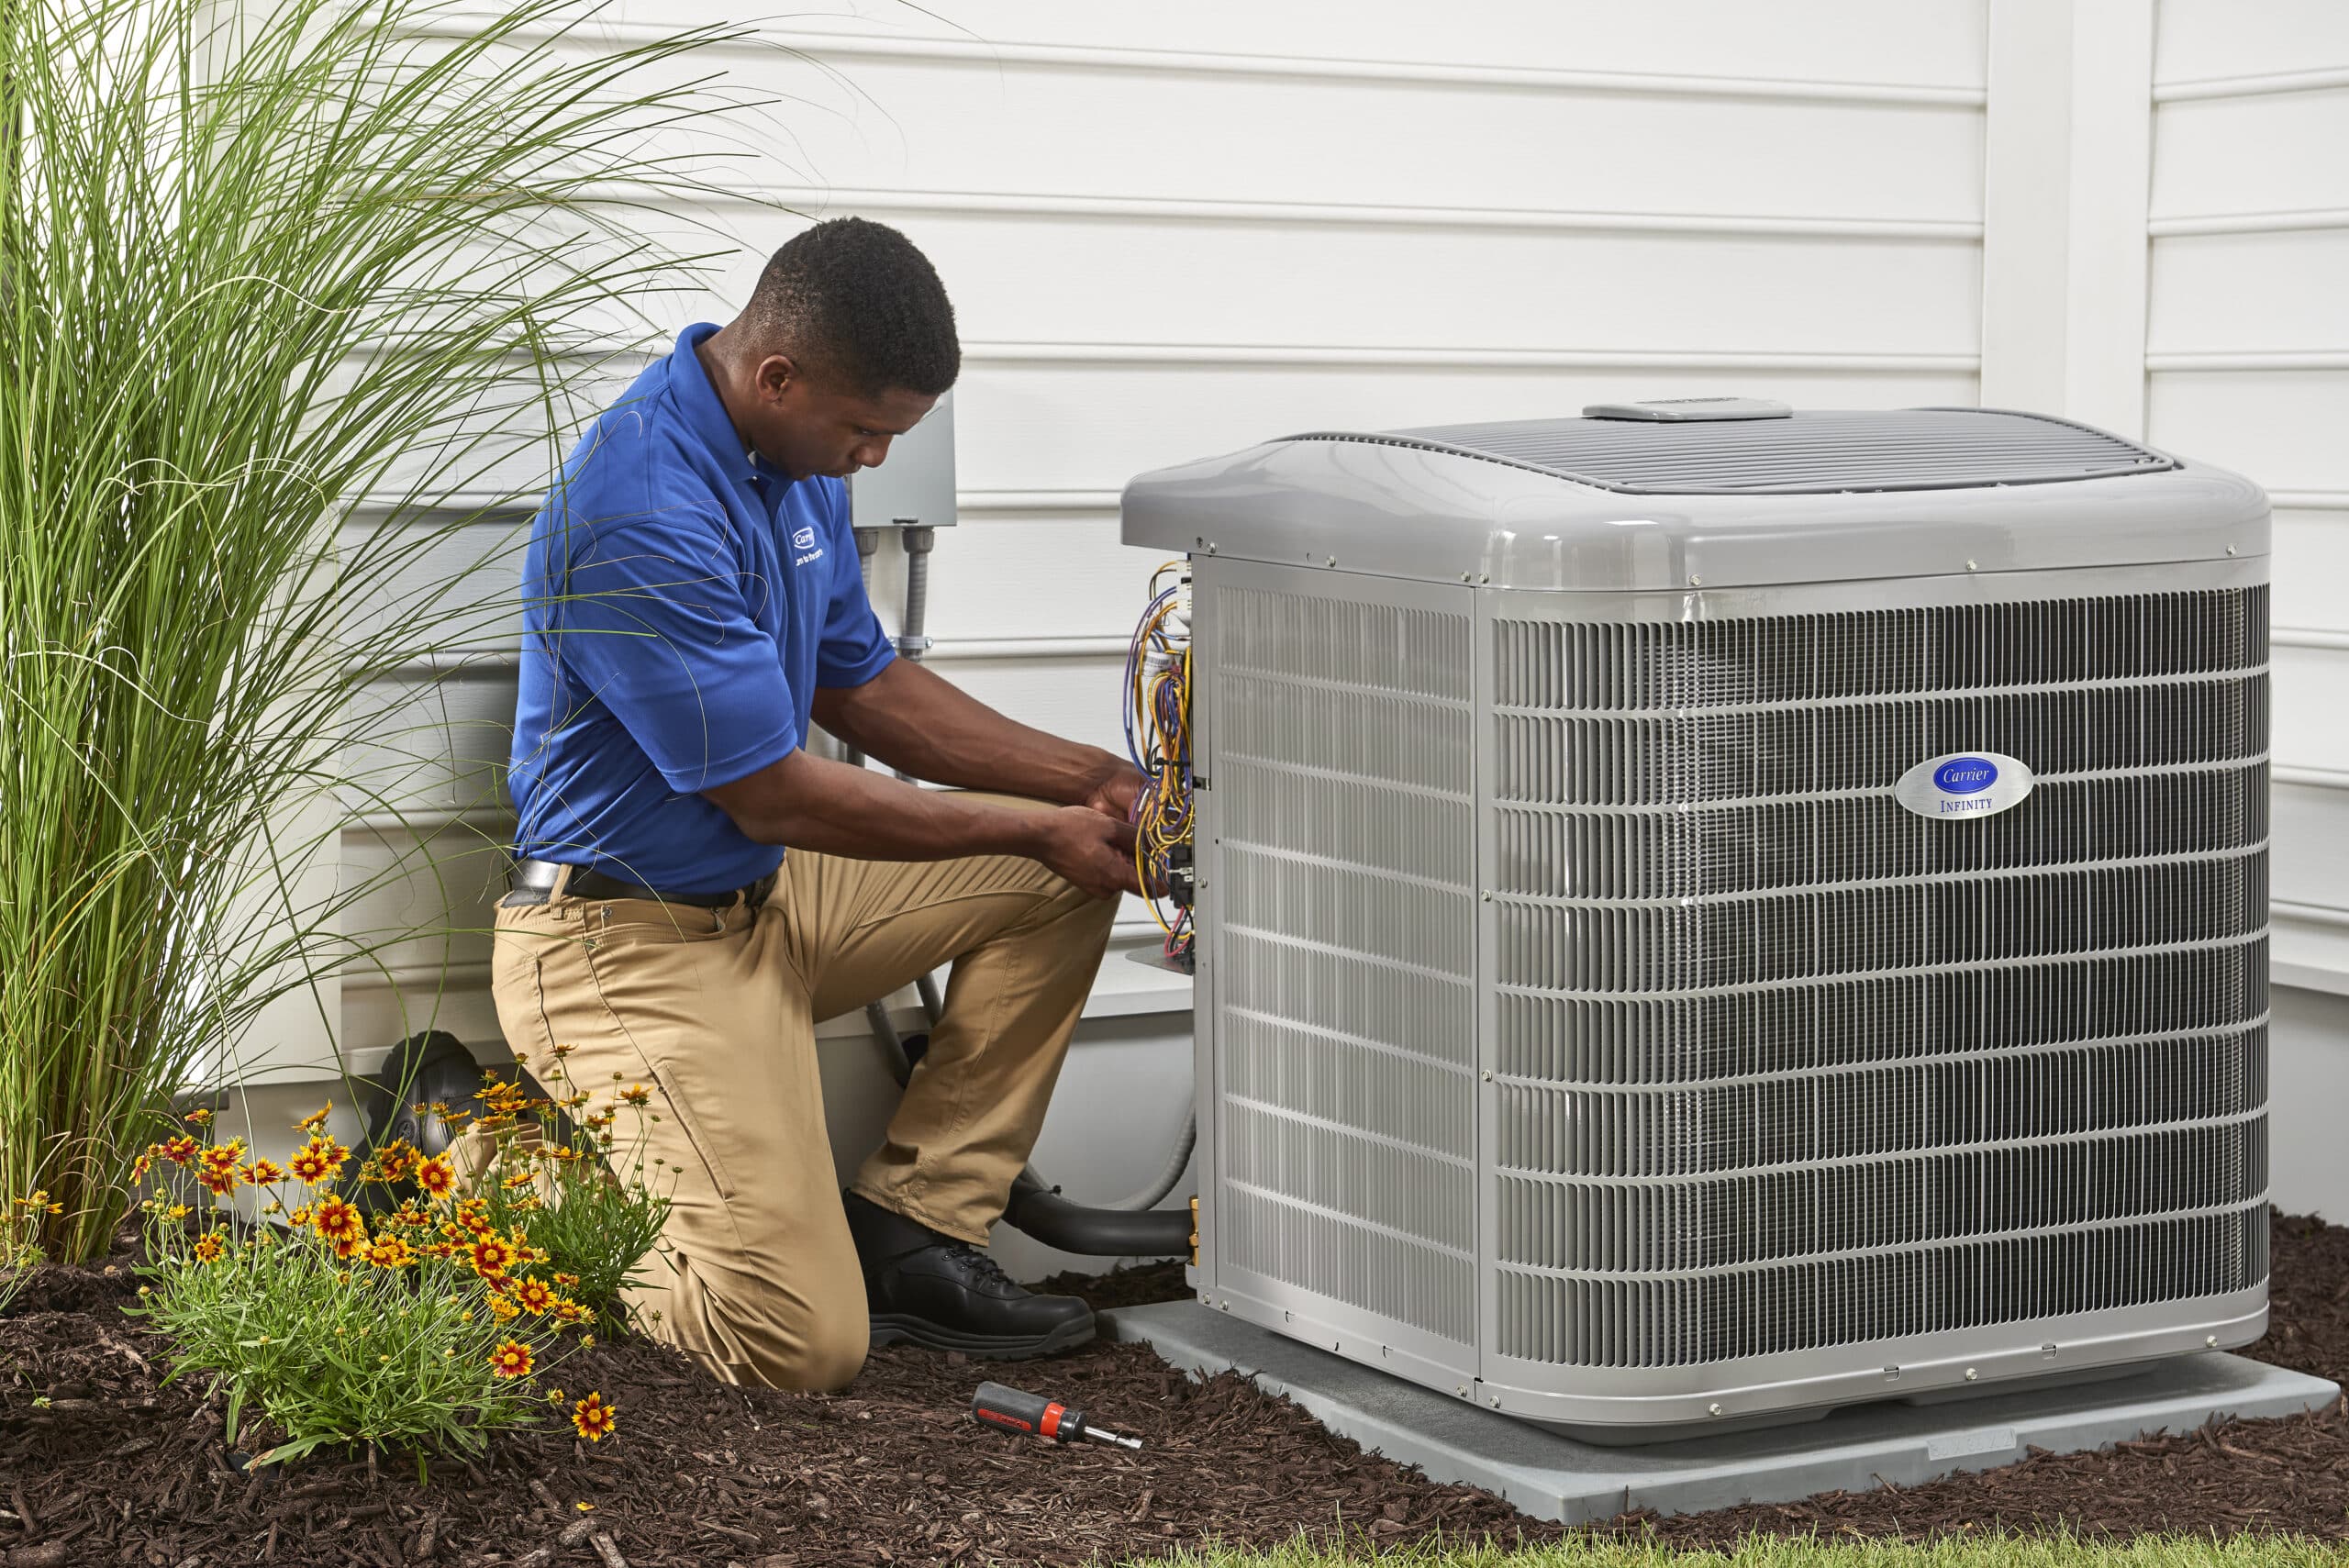 air conditioning,air conditioning service,air conditioning system,air conditioning companies near me,air conditioning repair